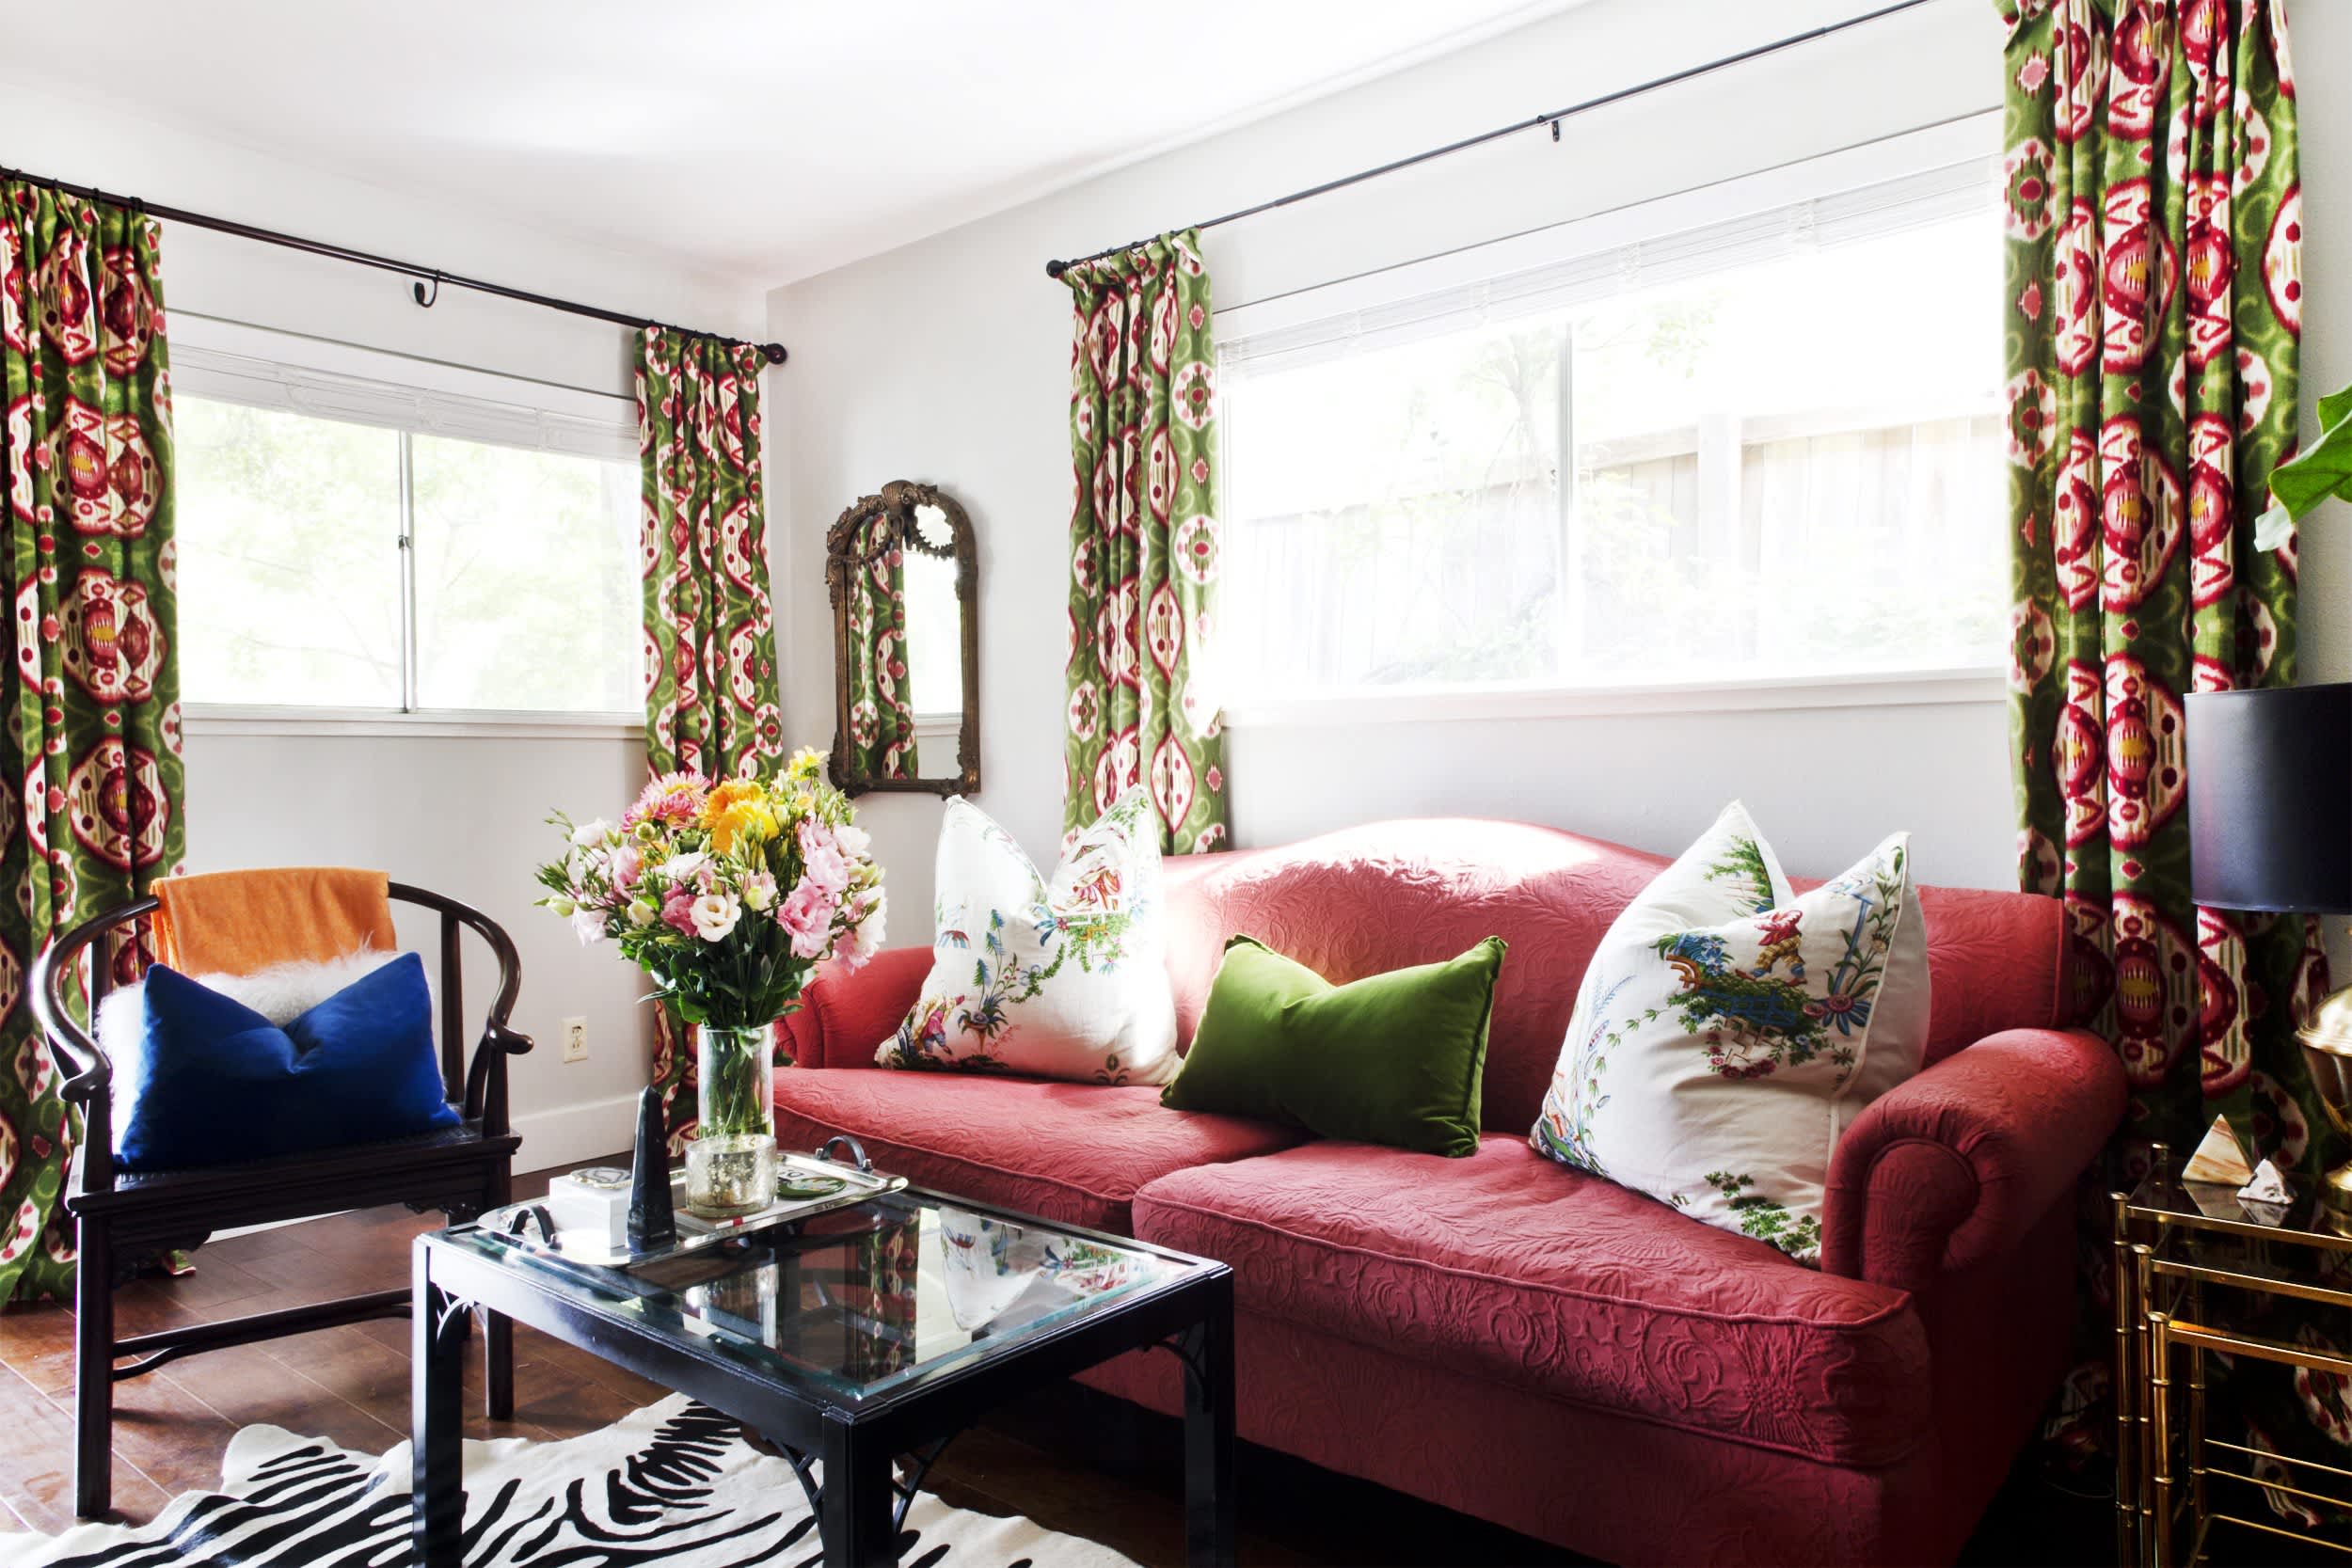 Curtains for Living Room: The Secret to Elevating Your Home Decor, by  KEVINFISKE.COM